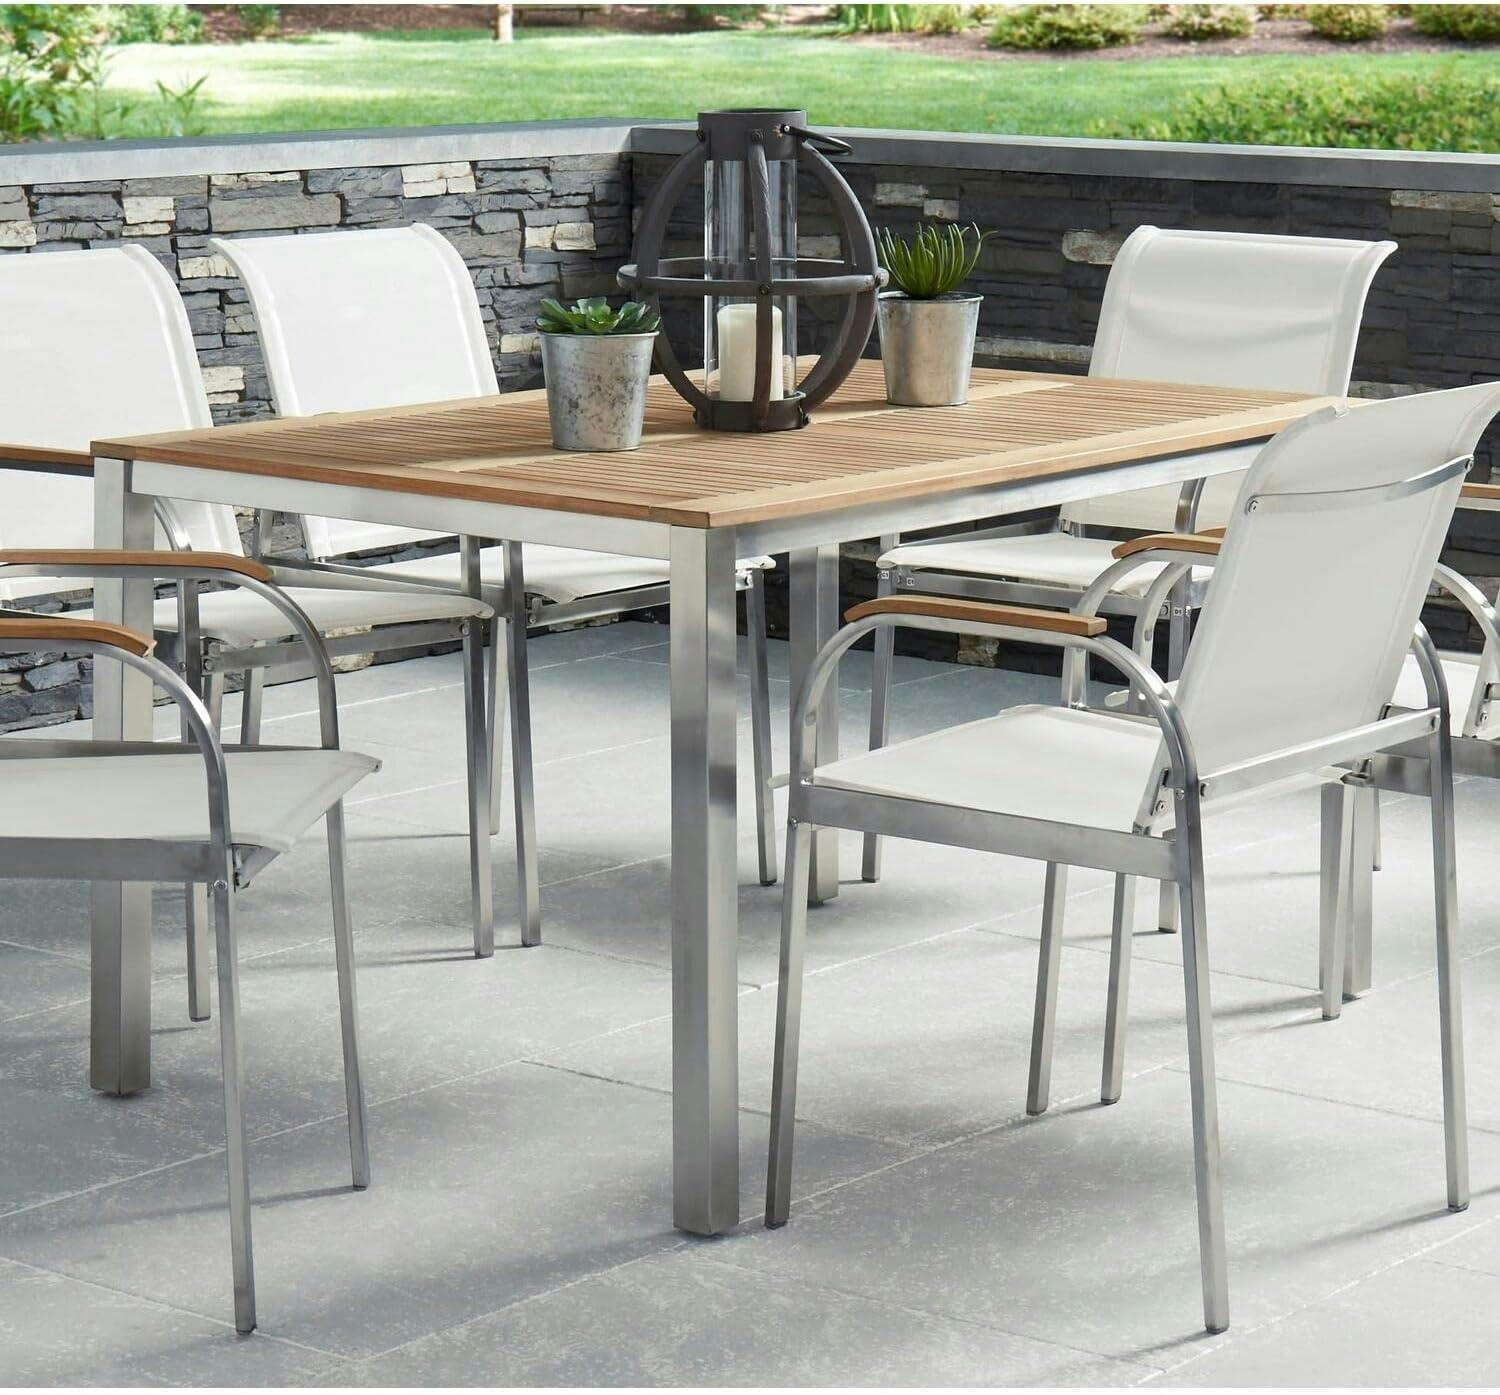 Aruba Elegance 22"x64" Teak and Stainless Steel Outdoor Dining Table